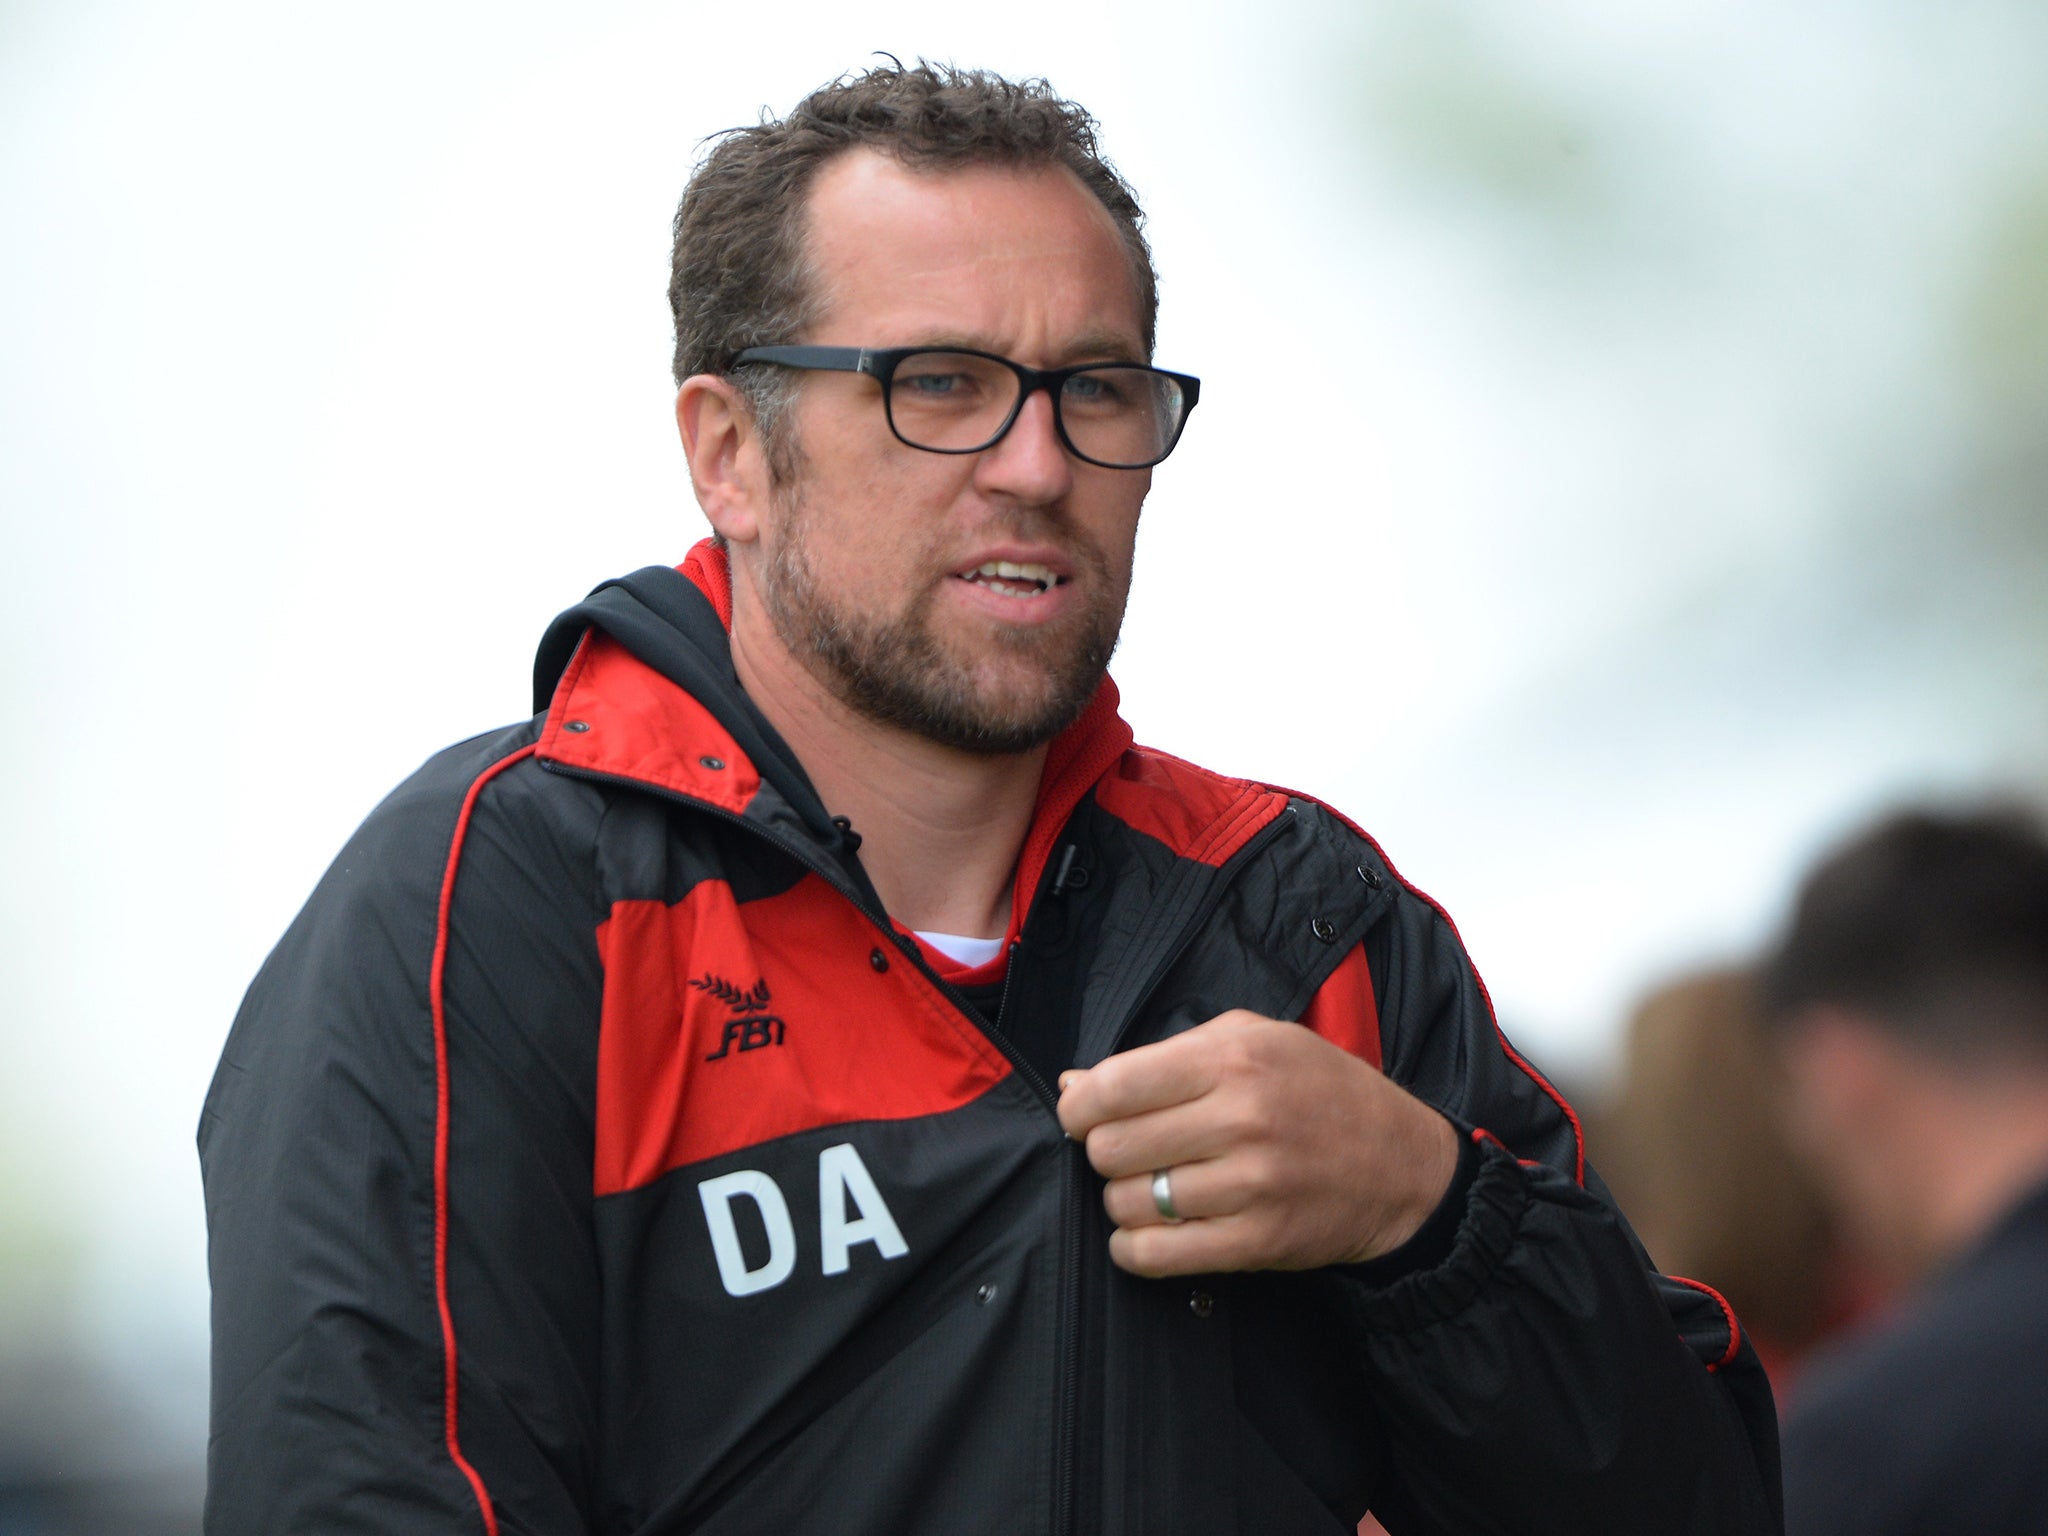 Crewe manager David Arnell referenced the suspended director of football Dario Gradi